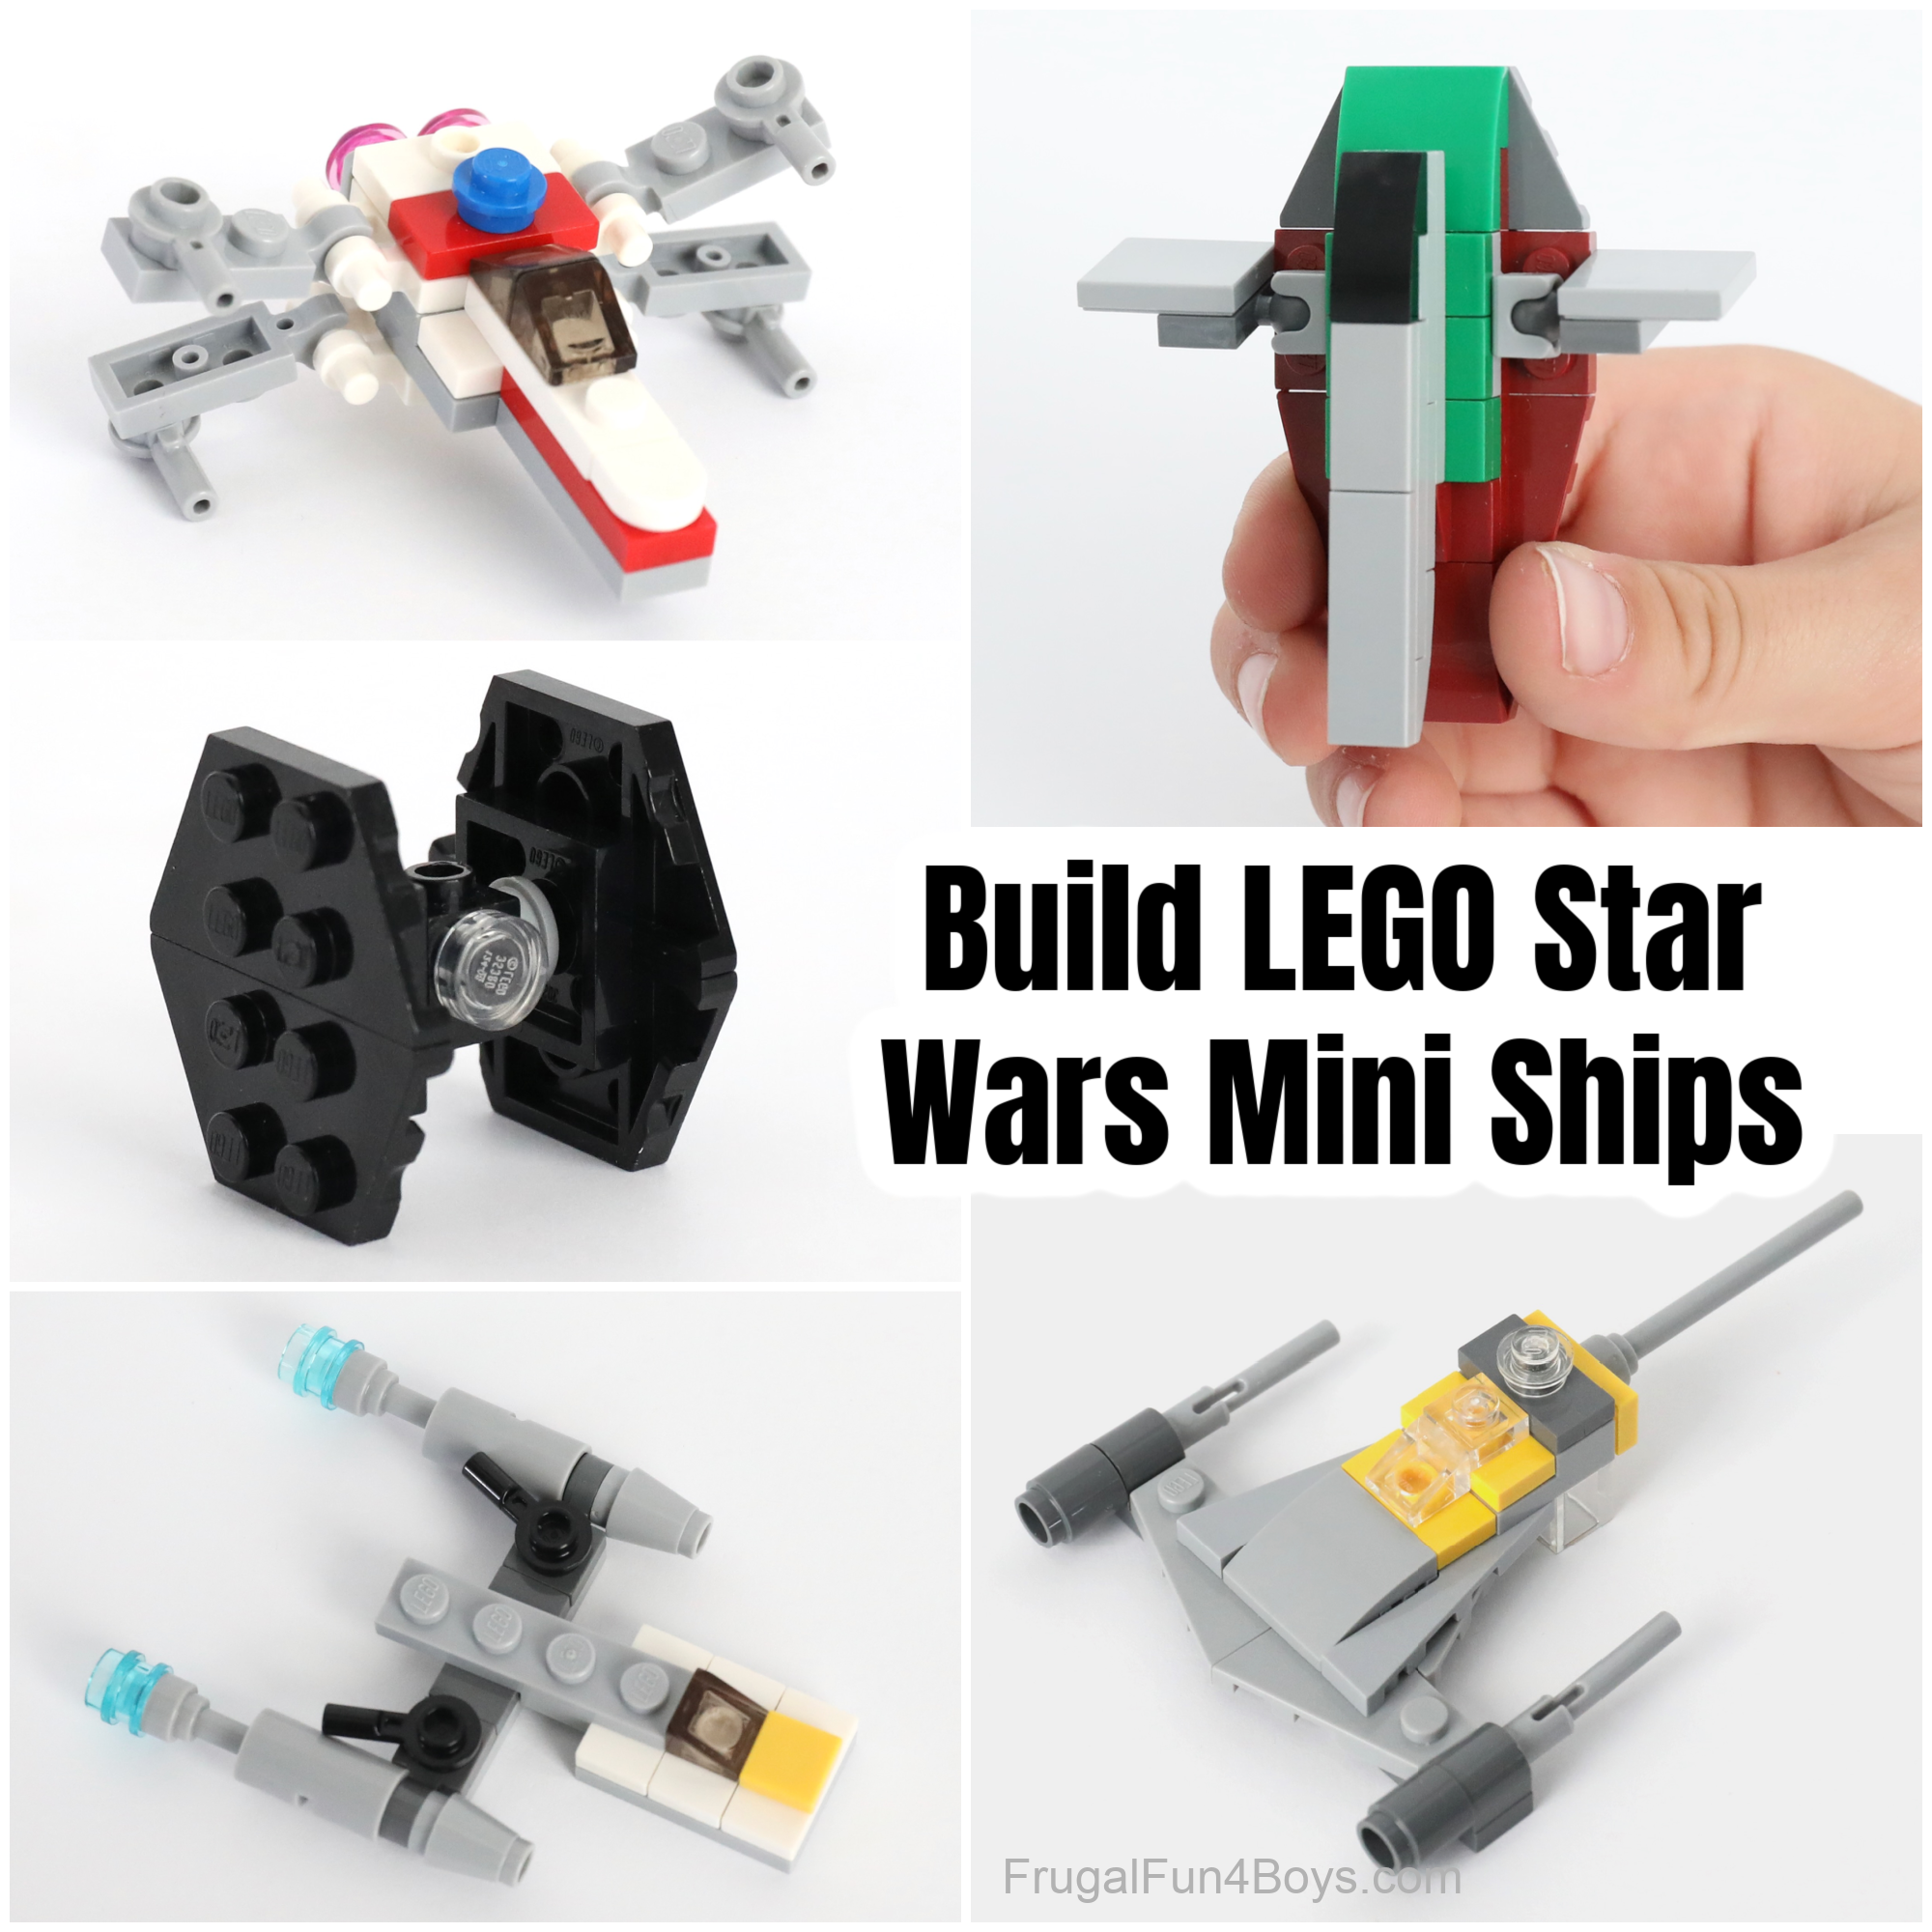 afsnit kæde is Build Your Own LEGO Mini Star Wars Ships - Frugal Fun For Boys and Girls